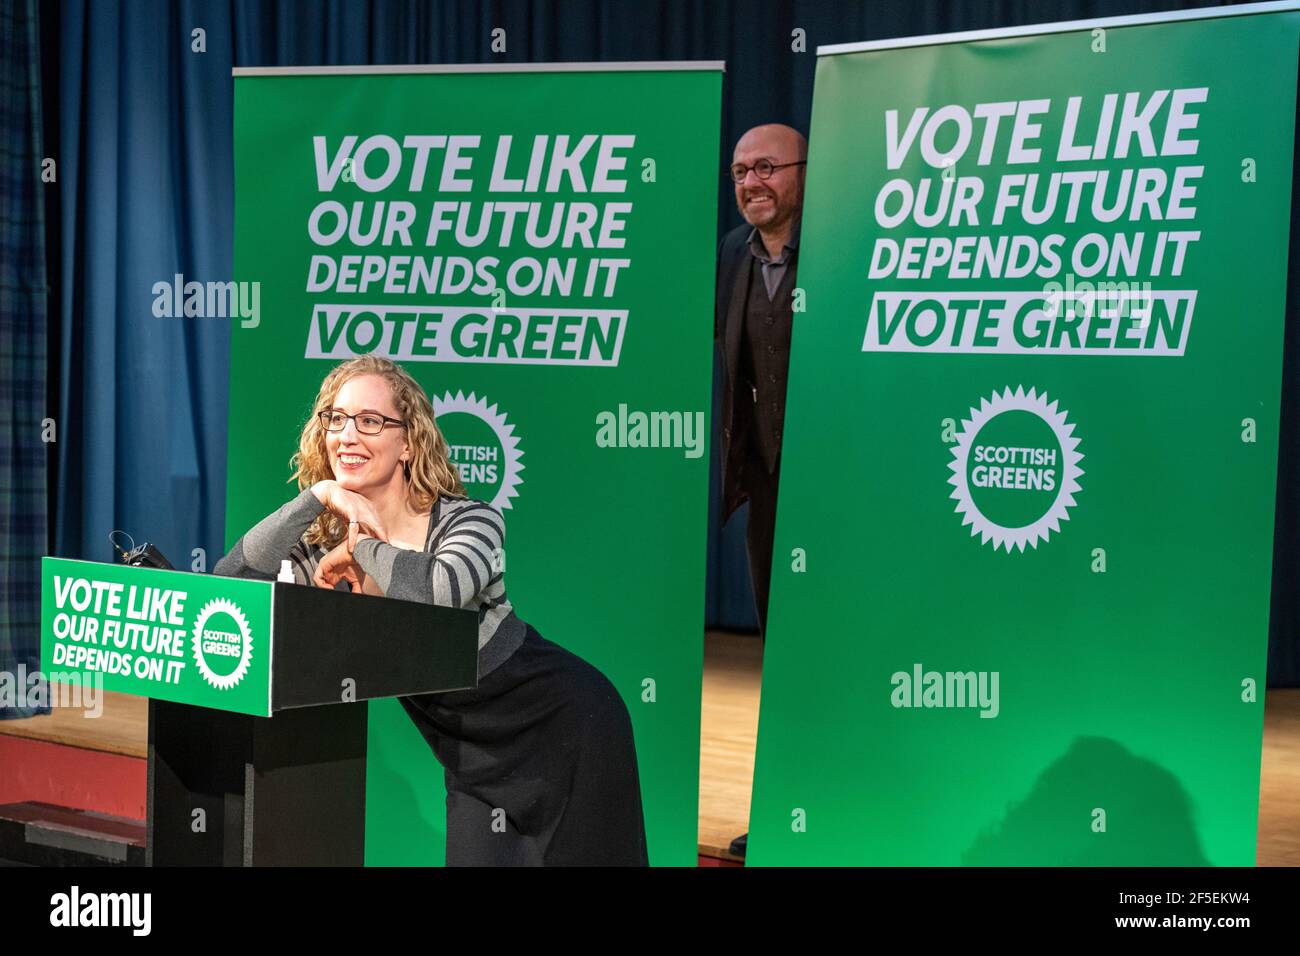 North Queensferry, Scotland, UK. 26 March 2021. PICTURED: (left) Lorna Slater; (right) Patrick Harvie MSP. Scottish Greens will today mark the start of their party conference by unveiling an end of term ‘report card' highlighting the party's achievements during the last parliamentary term. Credit: Colin Fisher/Alamy Live News Stock Photo